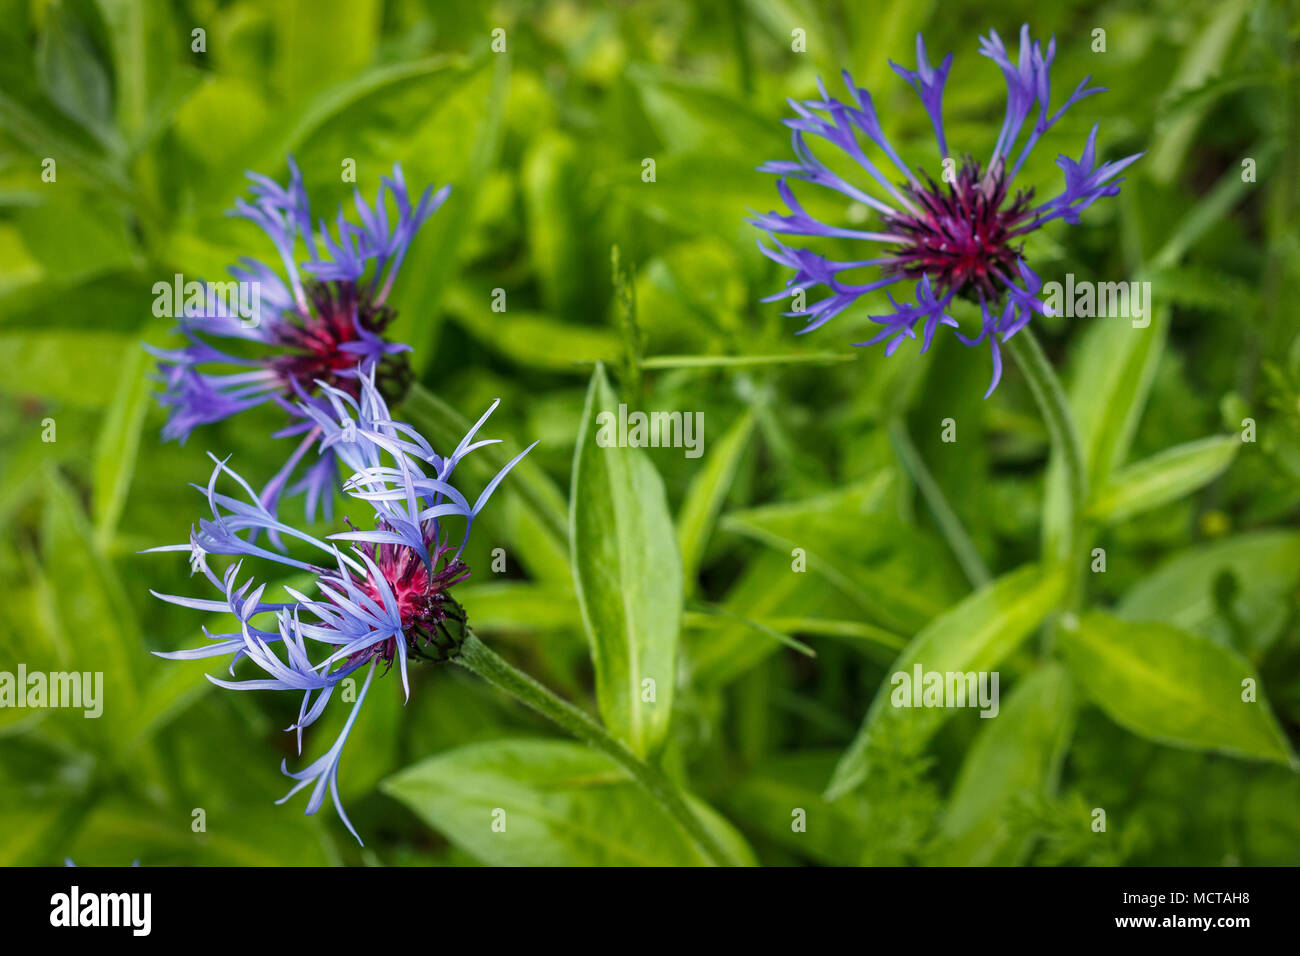 Three showy blue and purple blooms of naturalized perennial cornflower are surrounded by their green foliage in a garden in spring (British Columbia). Stock Photo